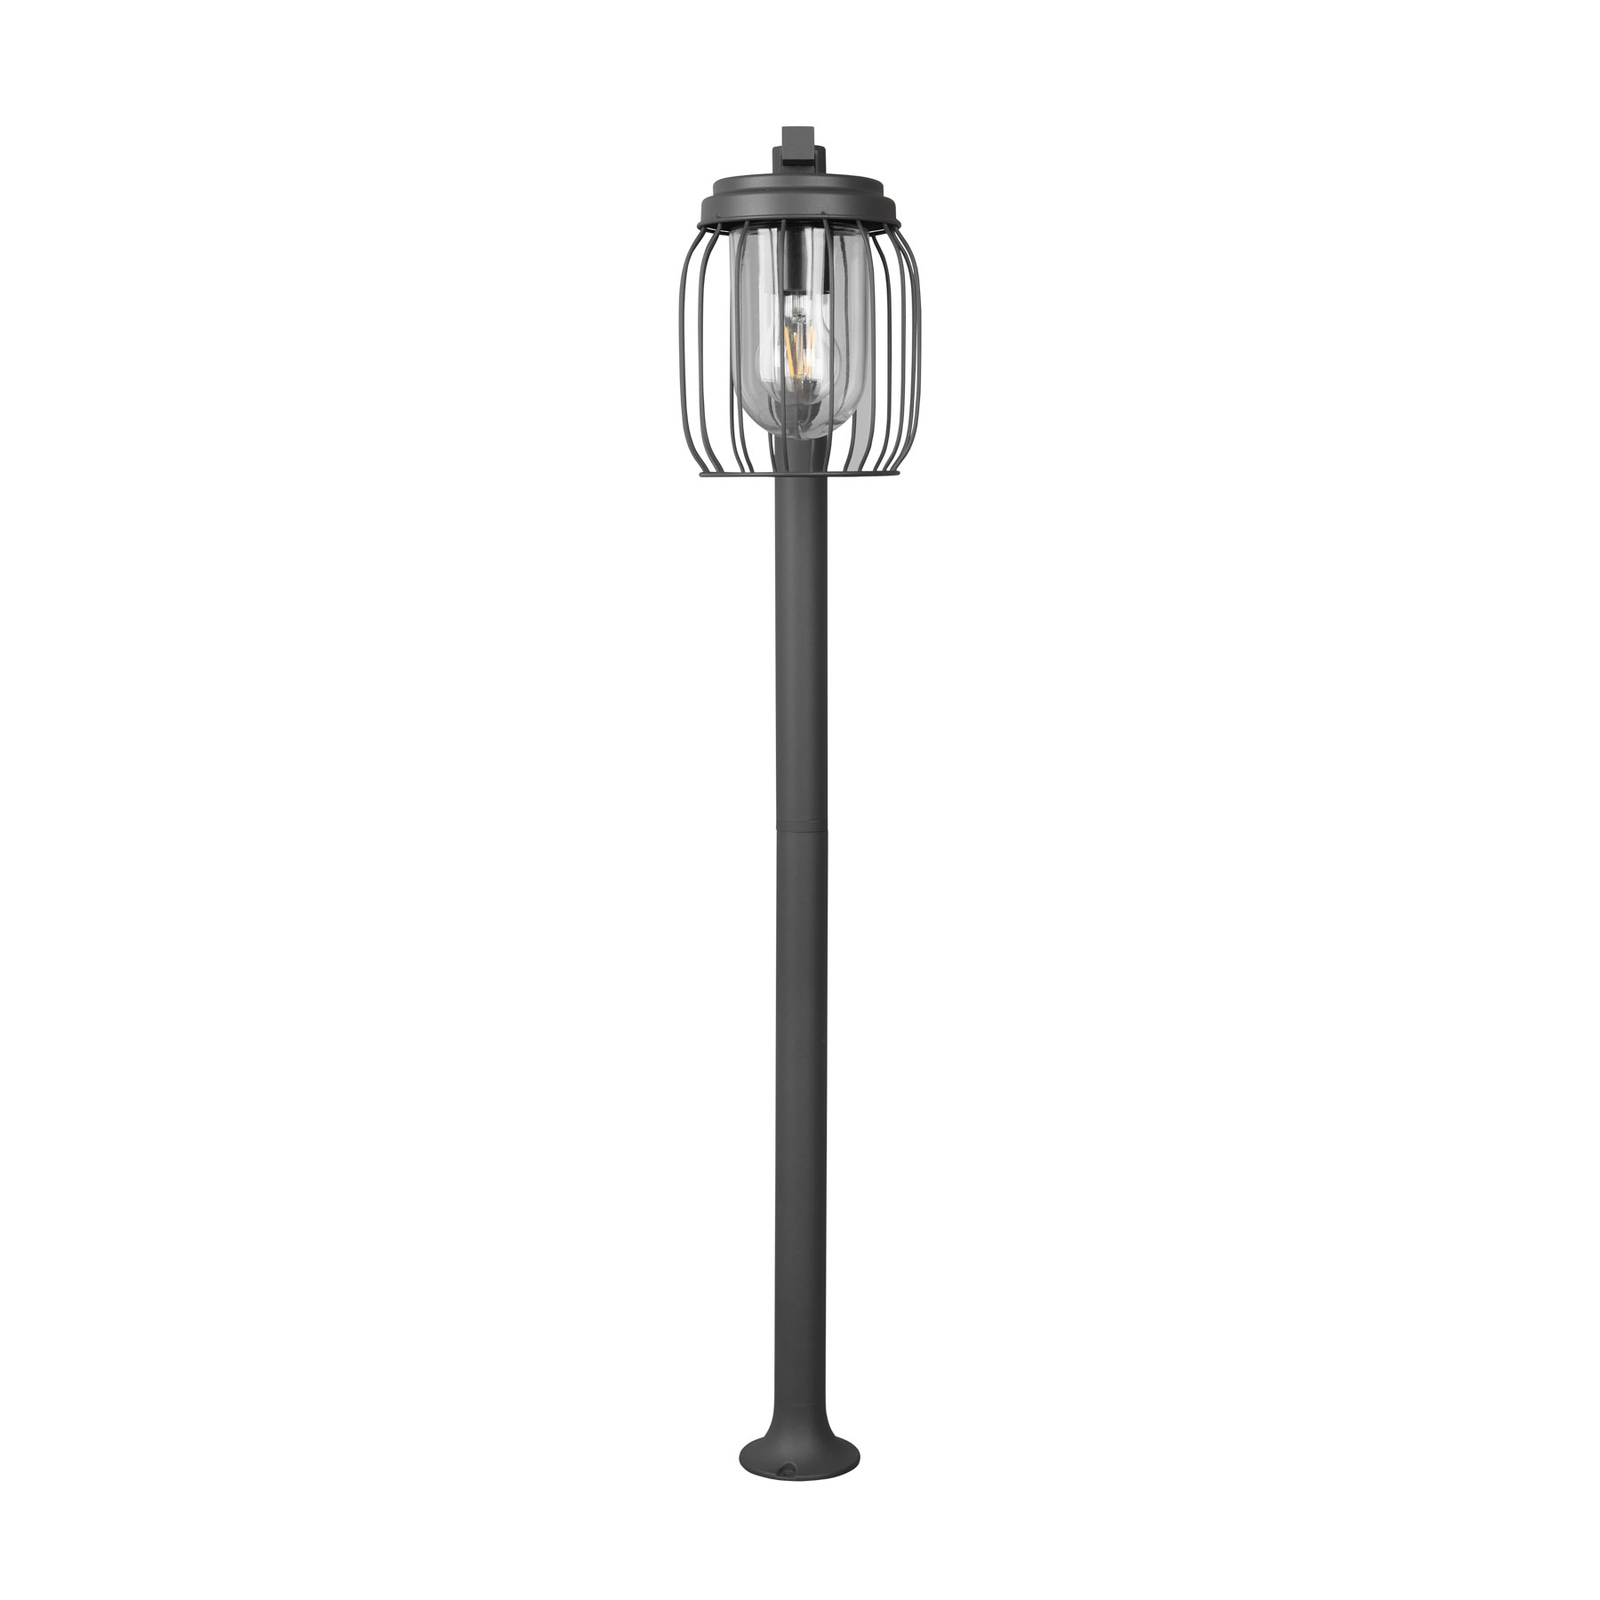 Tuela path light, height 100 cm, anthracite/clear